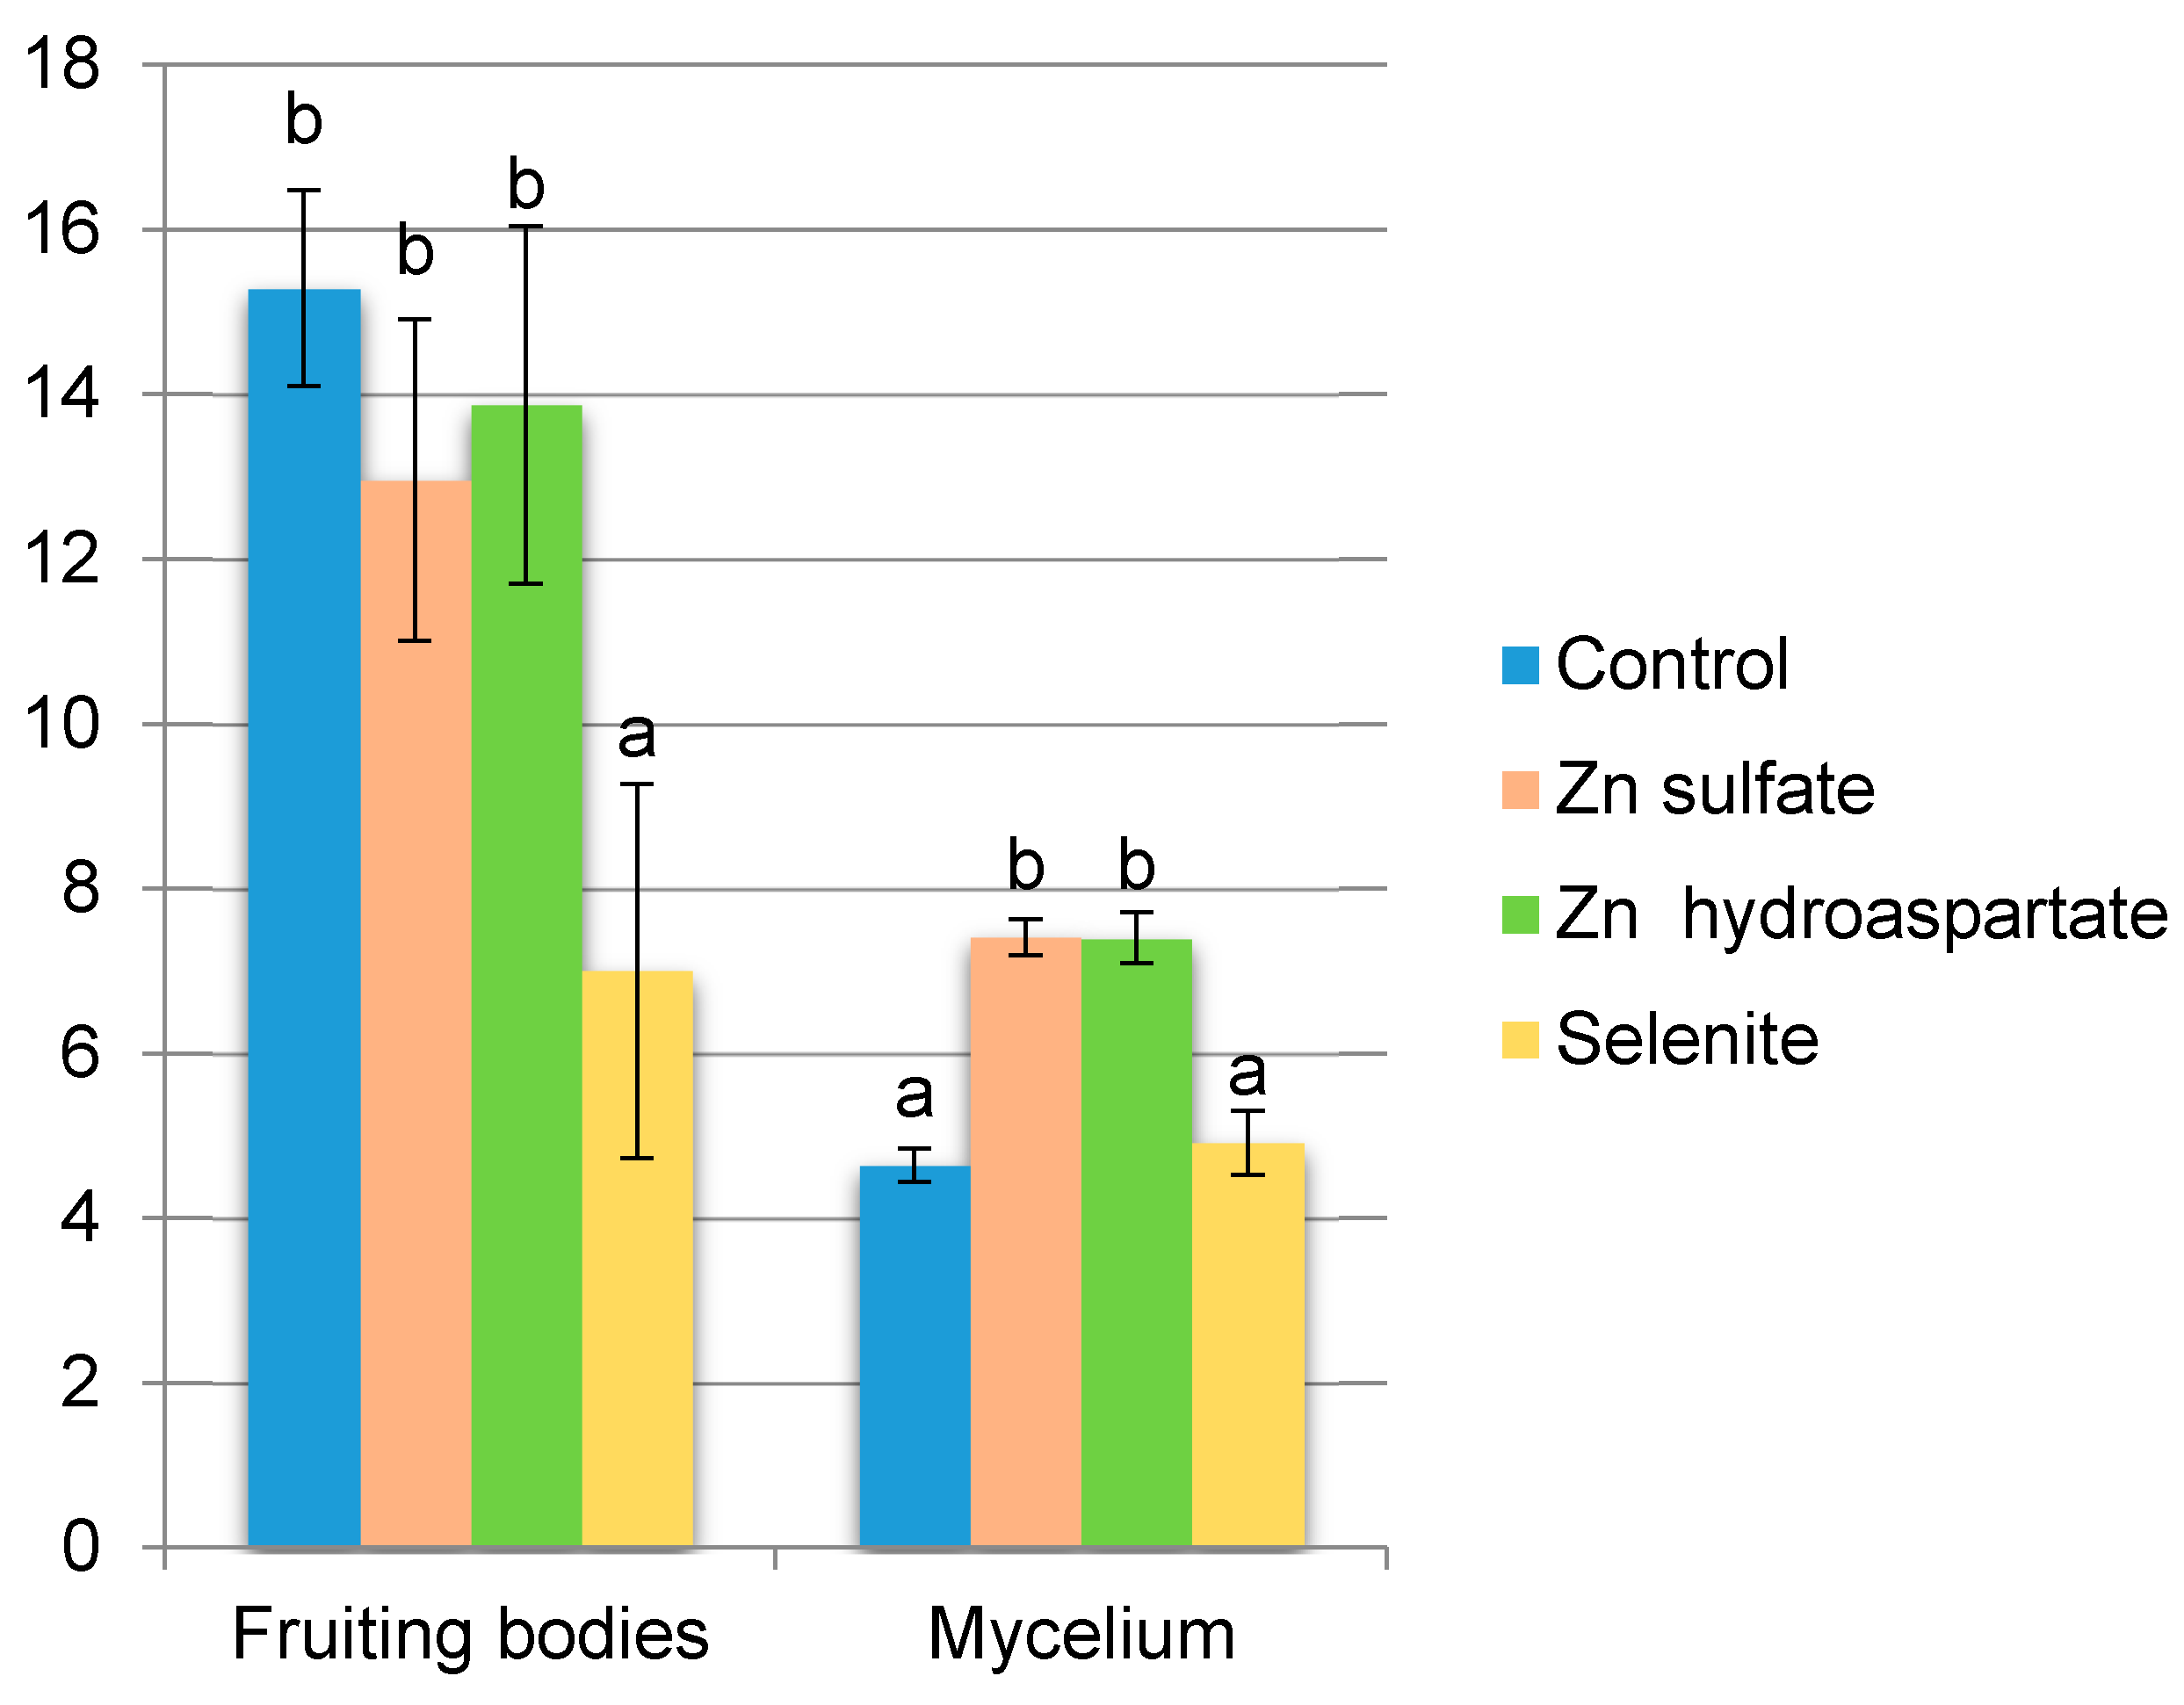 Molecules Free Full Text Selenium And Zinc Biofortification Of Pleurotus Eryngii Mycelium And Fruiting Bodies As A Tool For Controlling Their Biological Activity Html